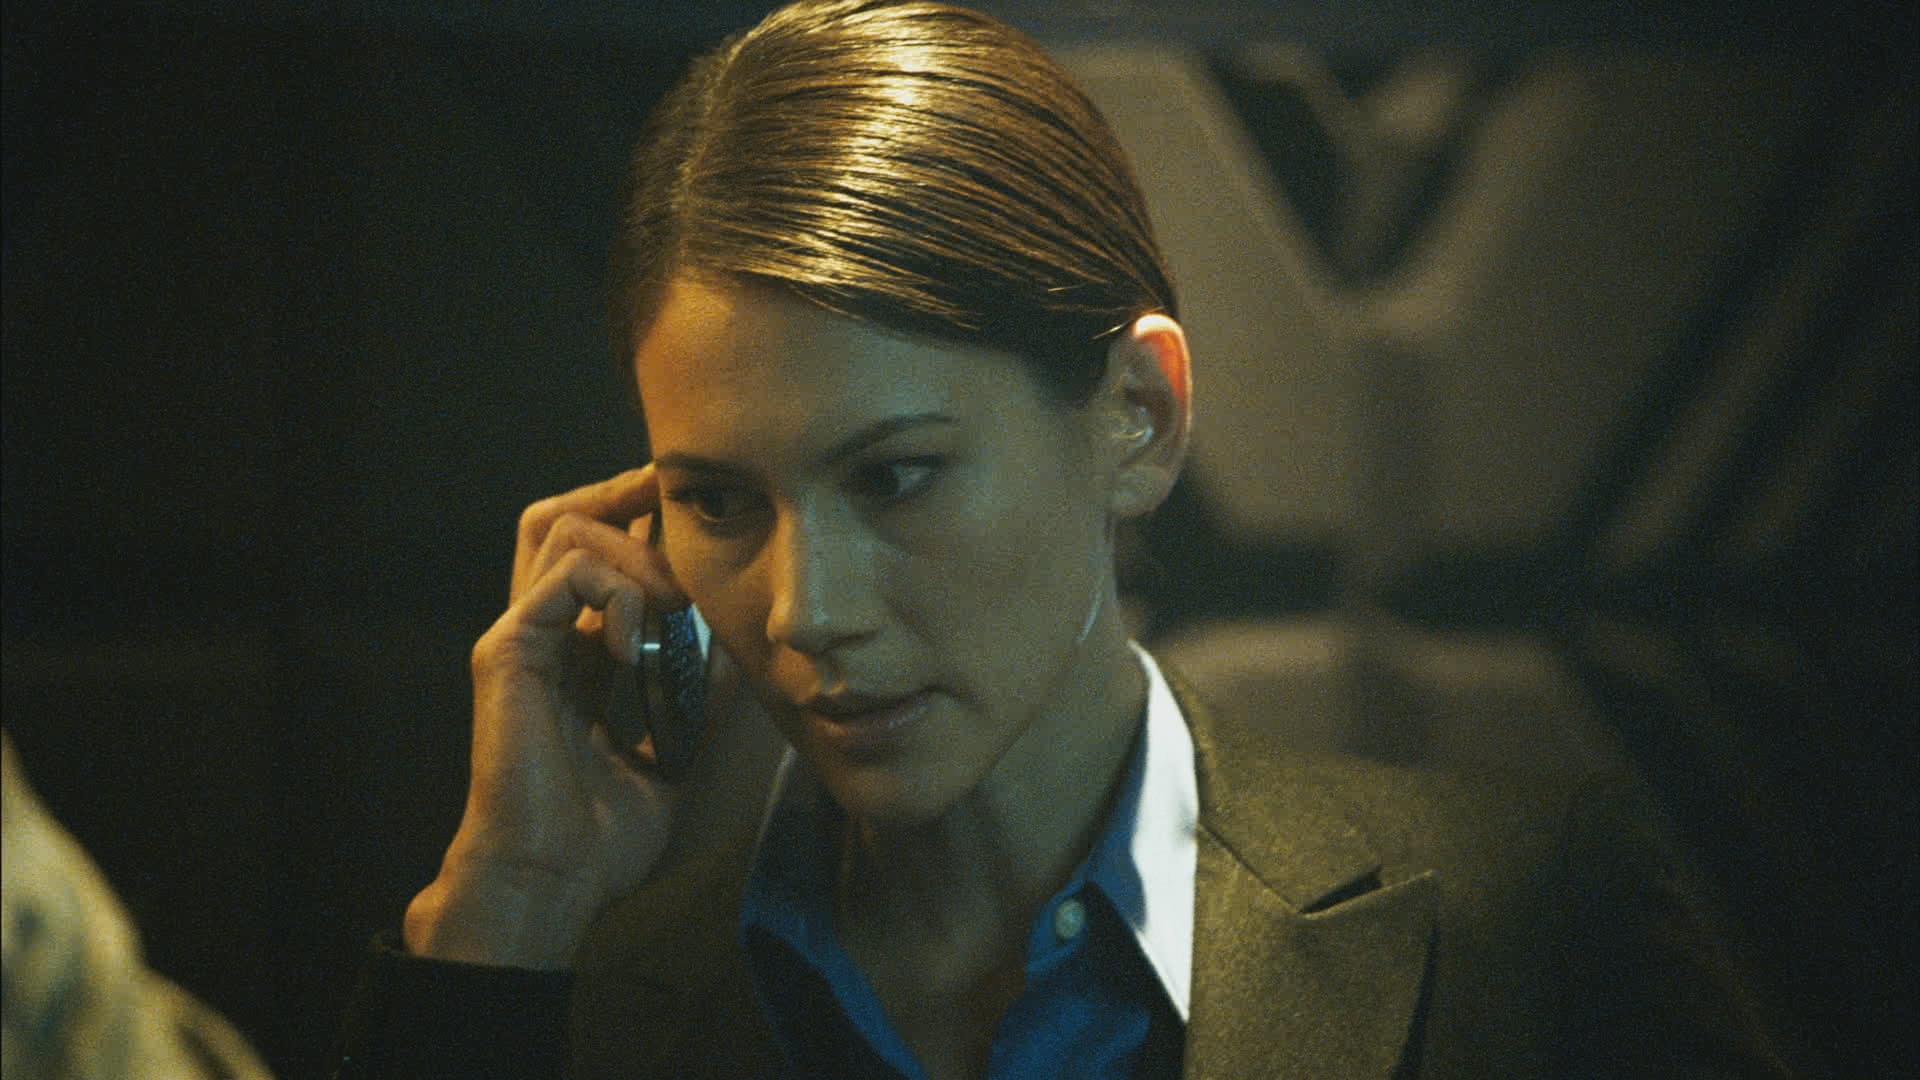 Catherine as CIA Agent Christine Niederbrook in 